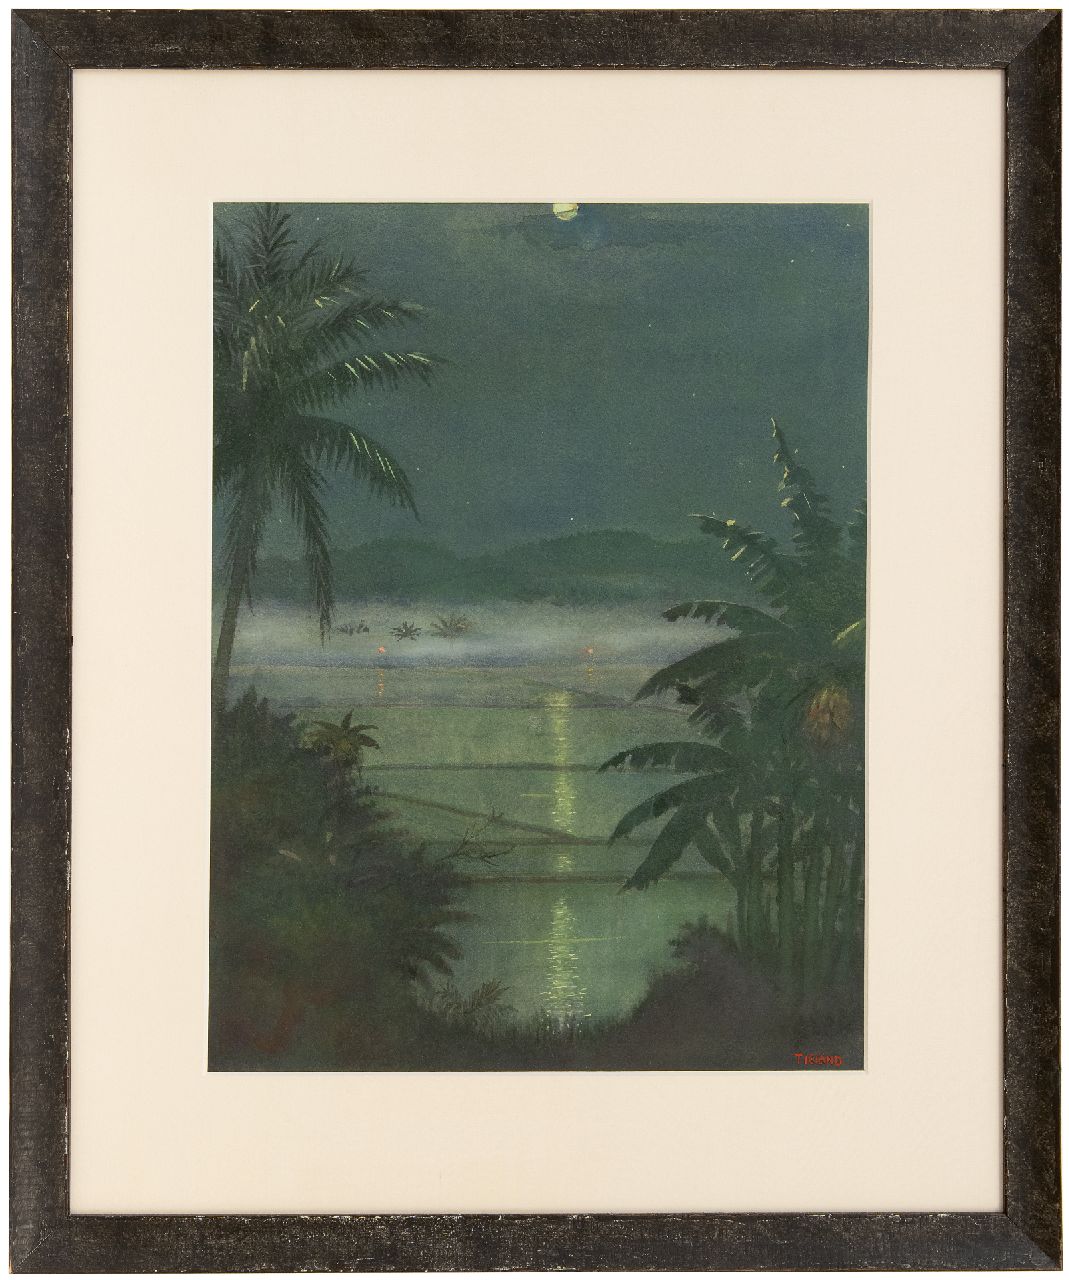 Tieland H.H.L.  | Henri Herman Leonardus Tieland | Watercolours and drawings offered for sale | Moon evening in the Preanger, Java, watercolour on paper 48.0 x 36.4 cm, signed l.r.